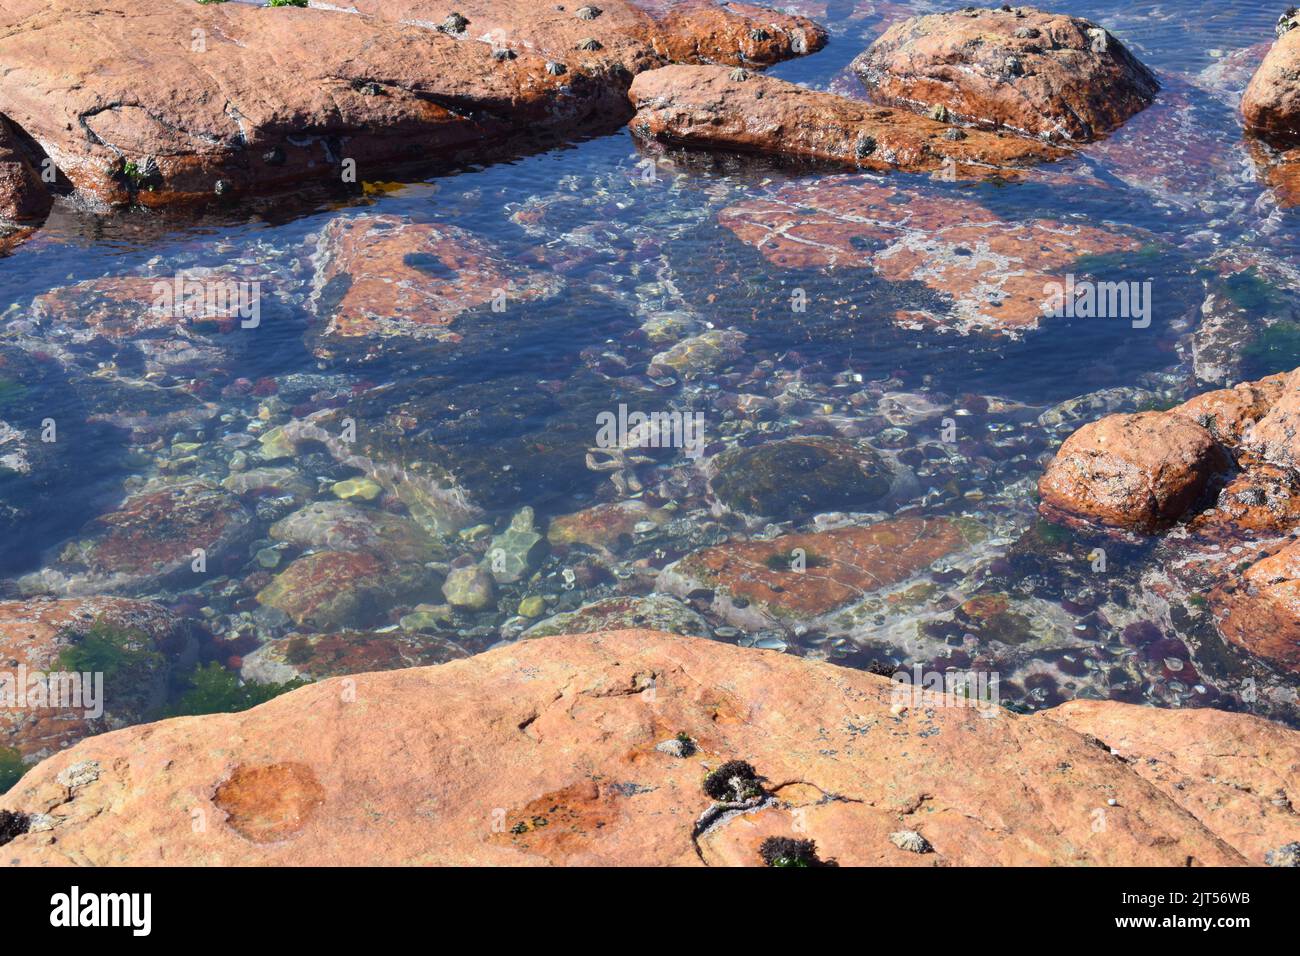 Tidal puddle showing different dimensions of the rocks and sand that camouflage a central starfish. Stock Photo